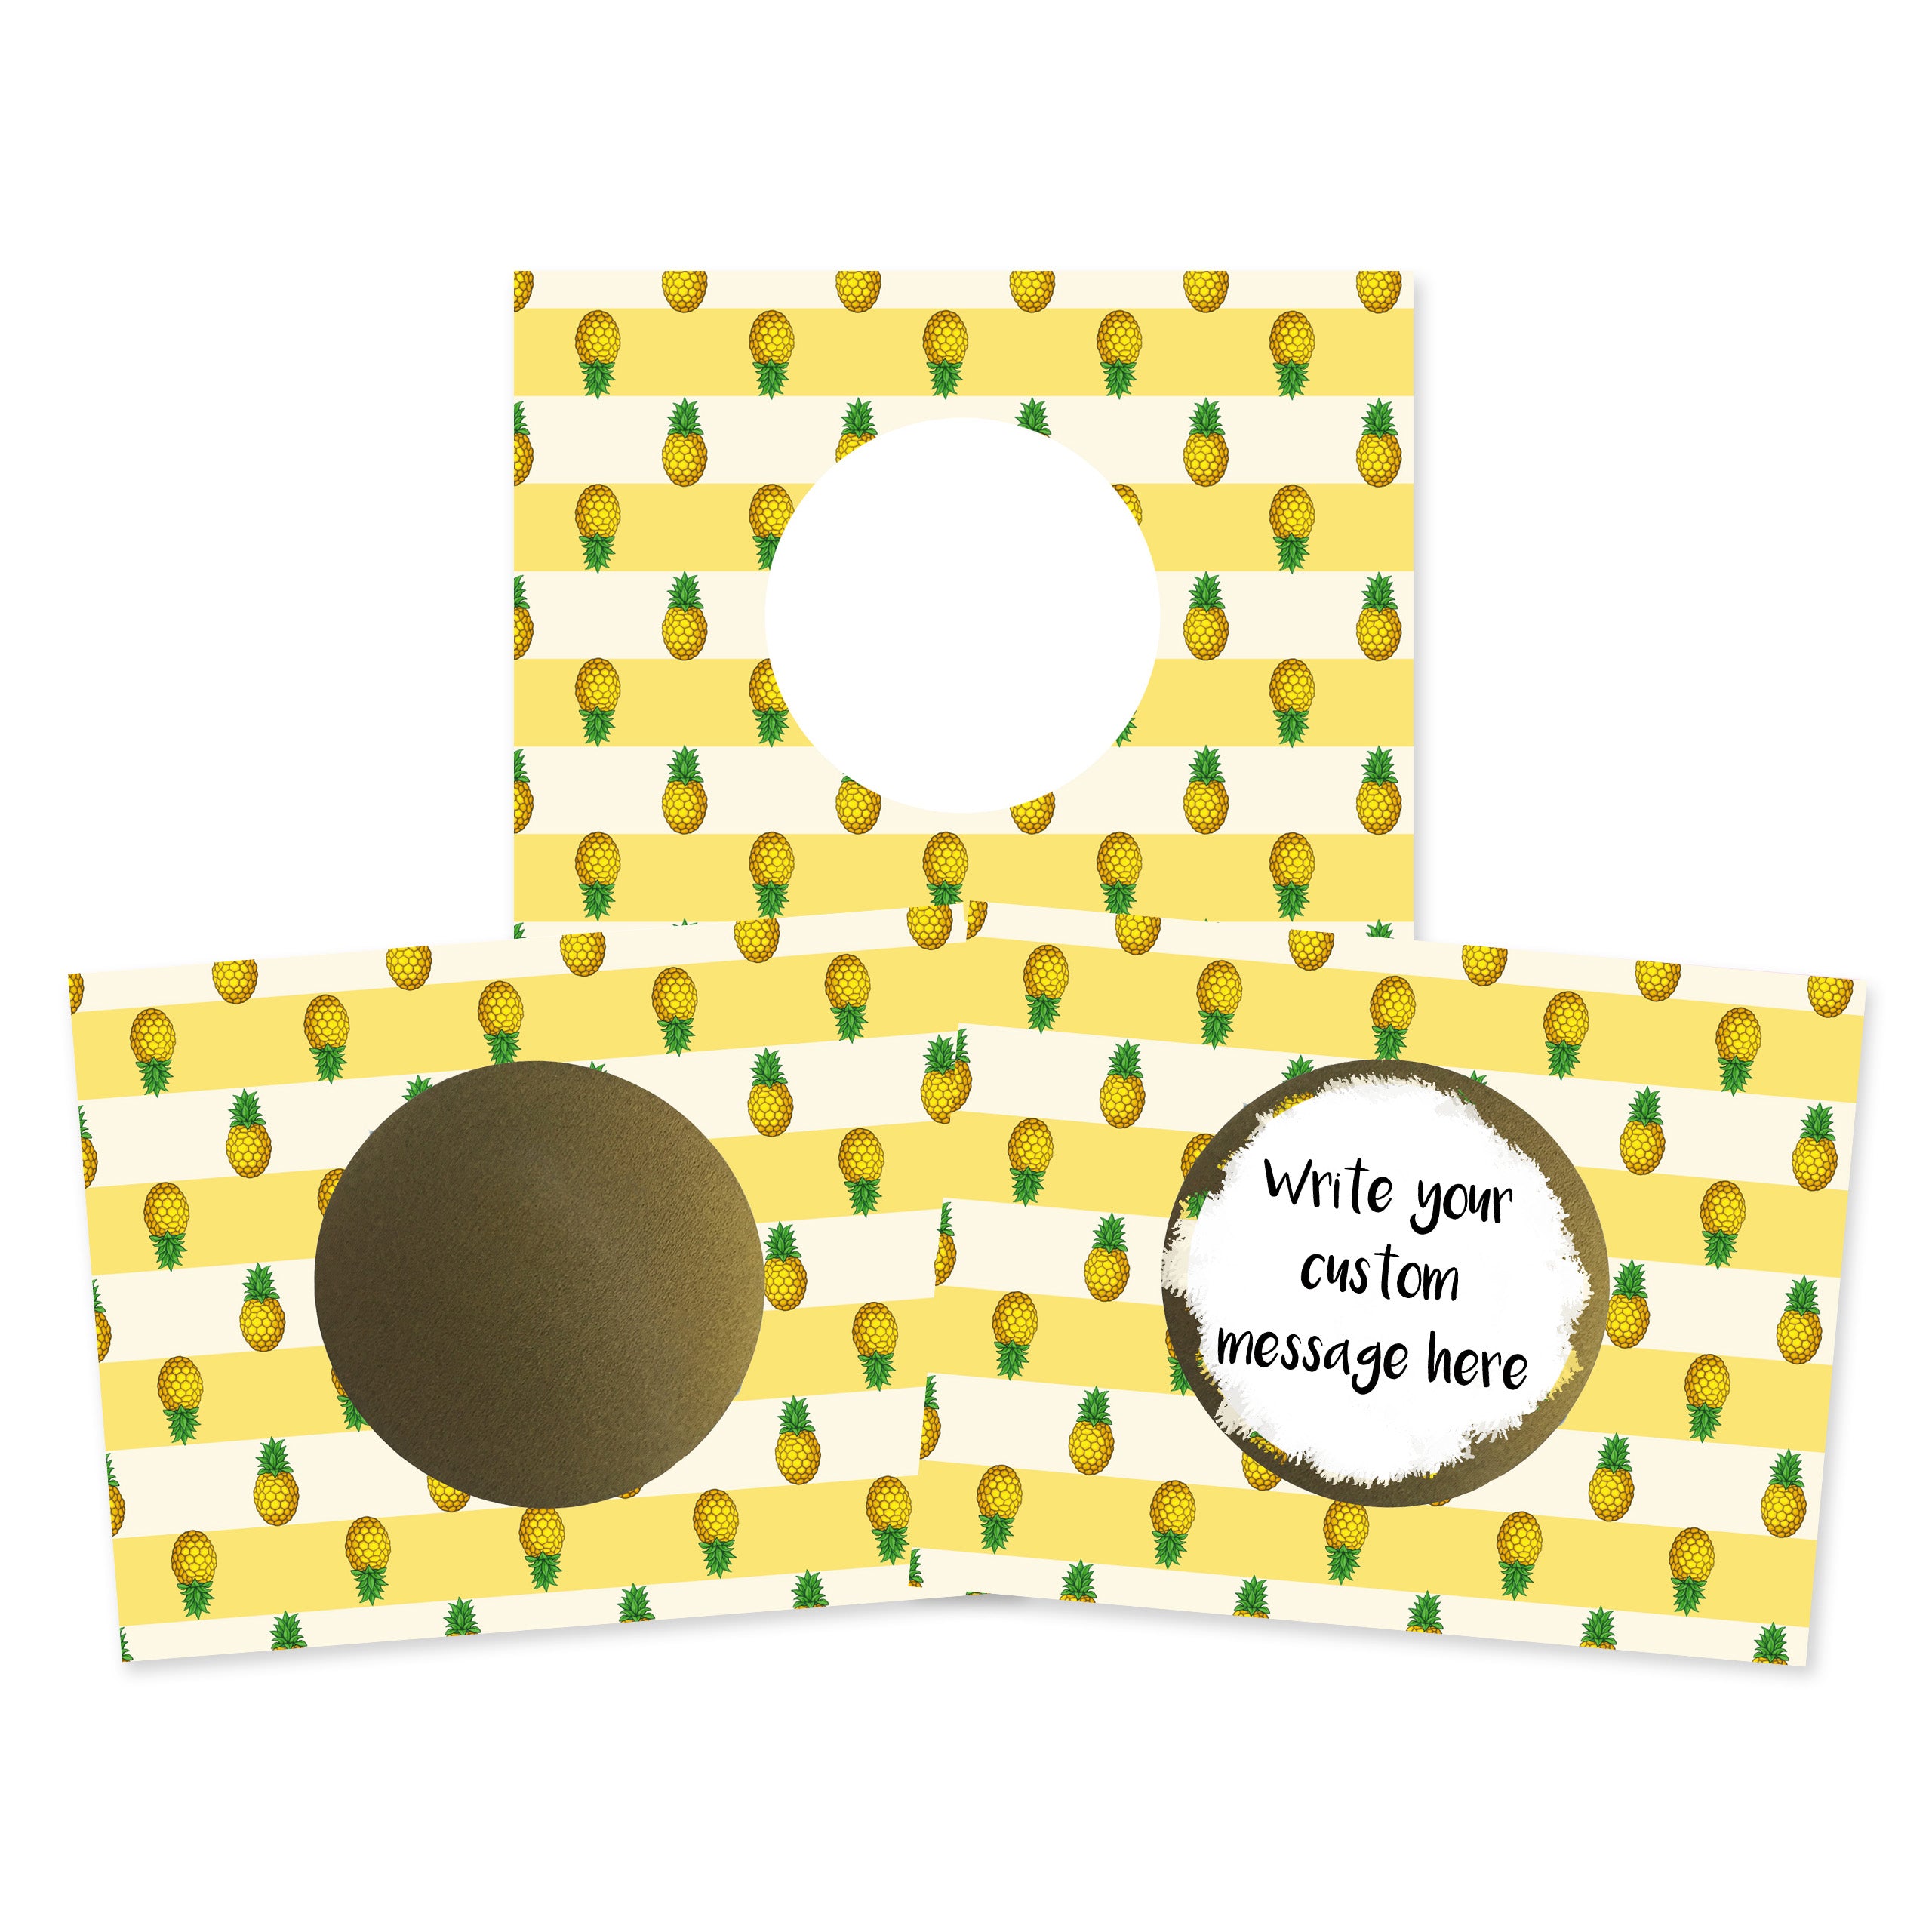 Scratch Off After Dark DIY Make Your Own Scratch Off Upside Down Pineapple